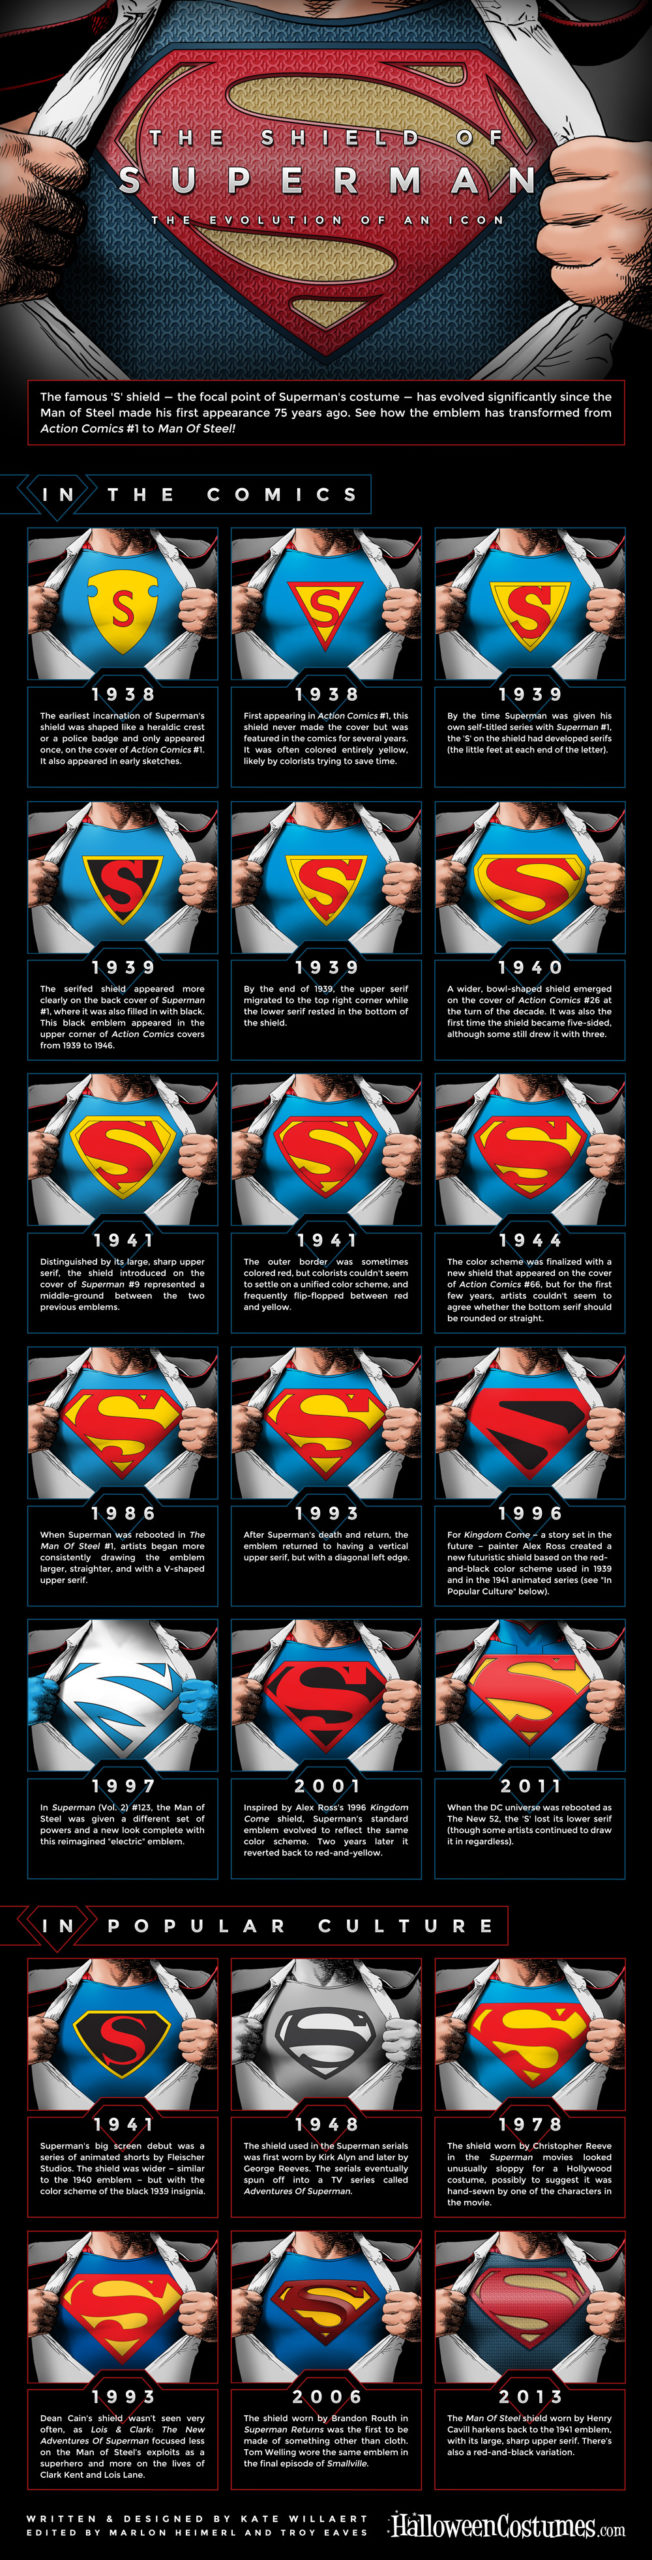 A Complete Visual History Of Superman’s Signature ‘S’